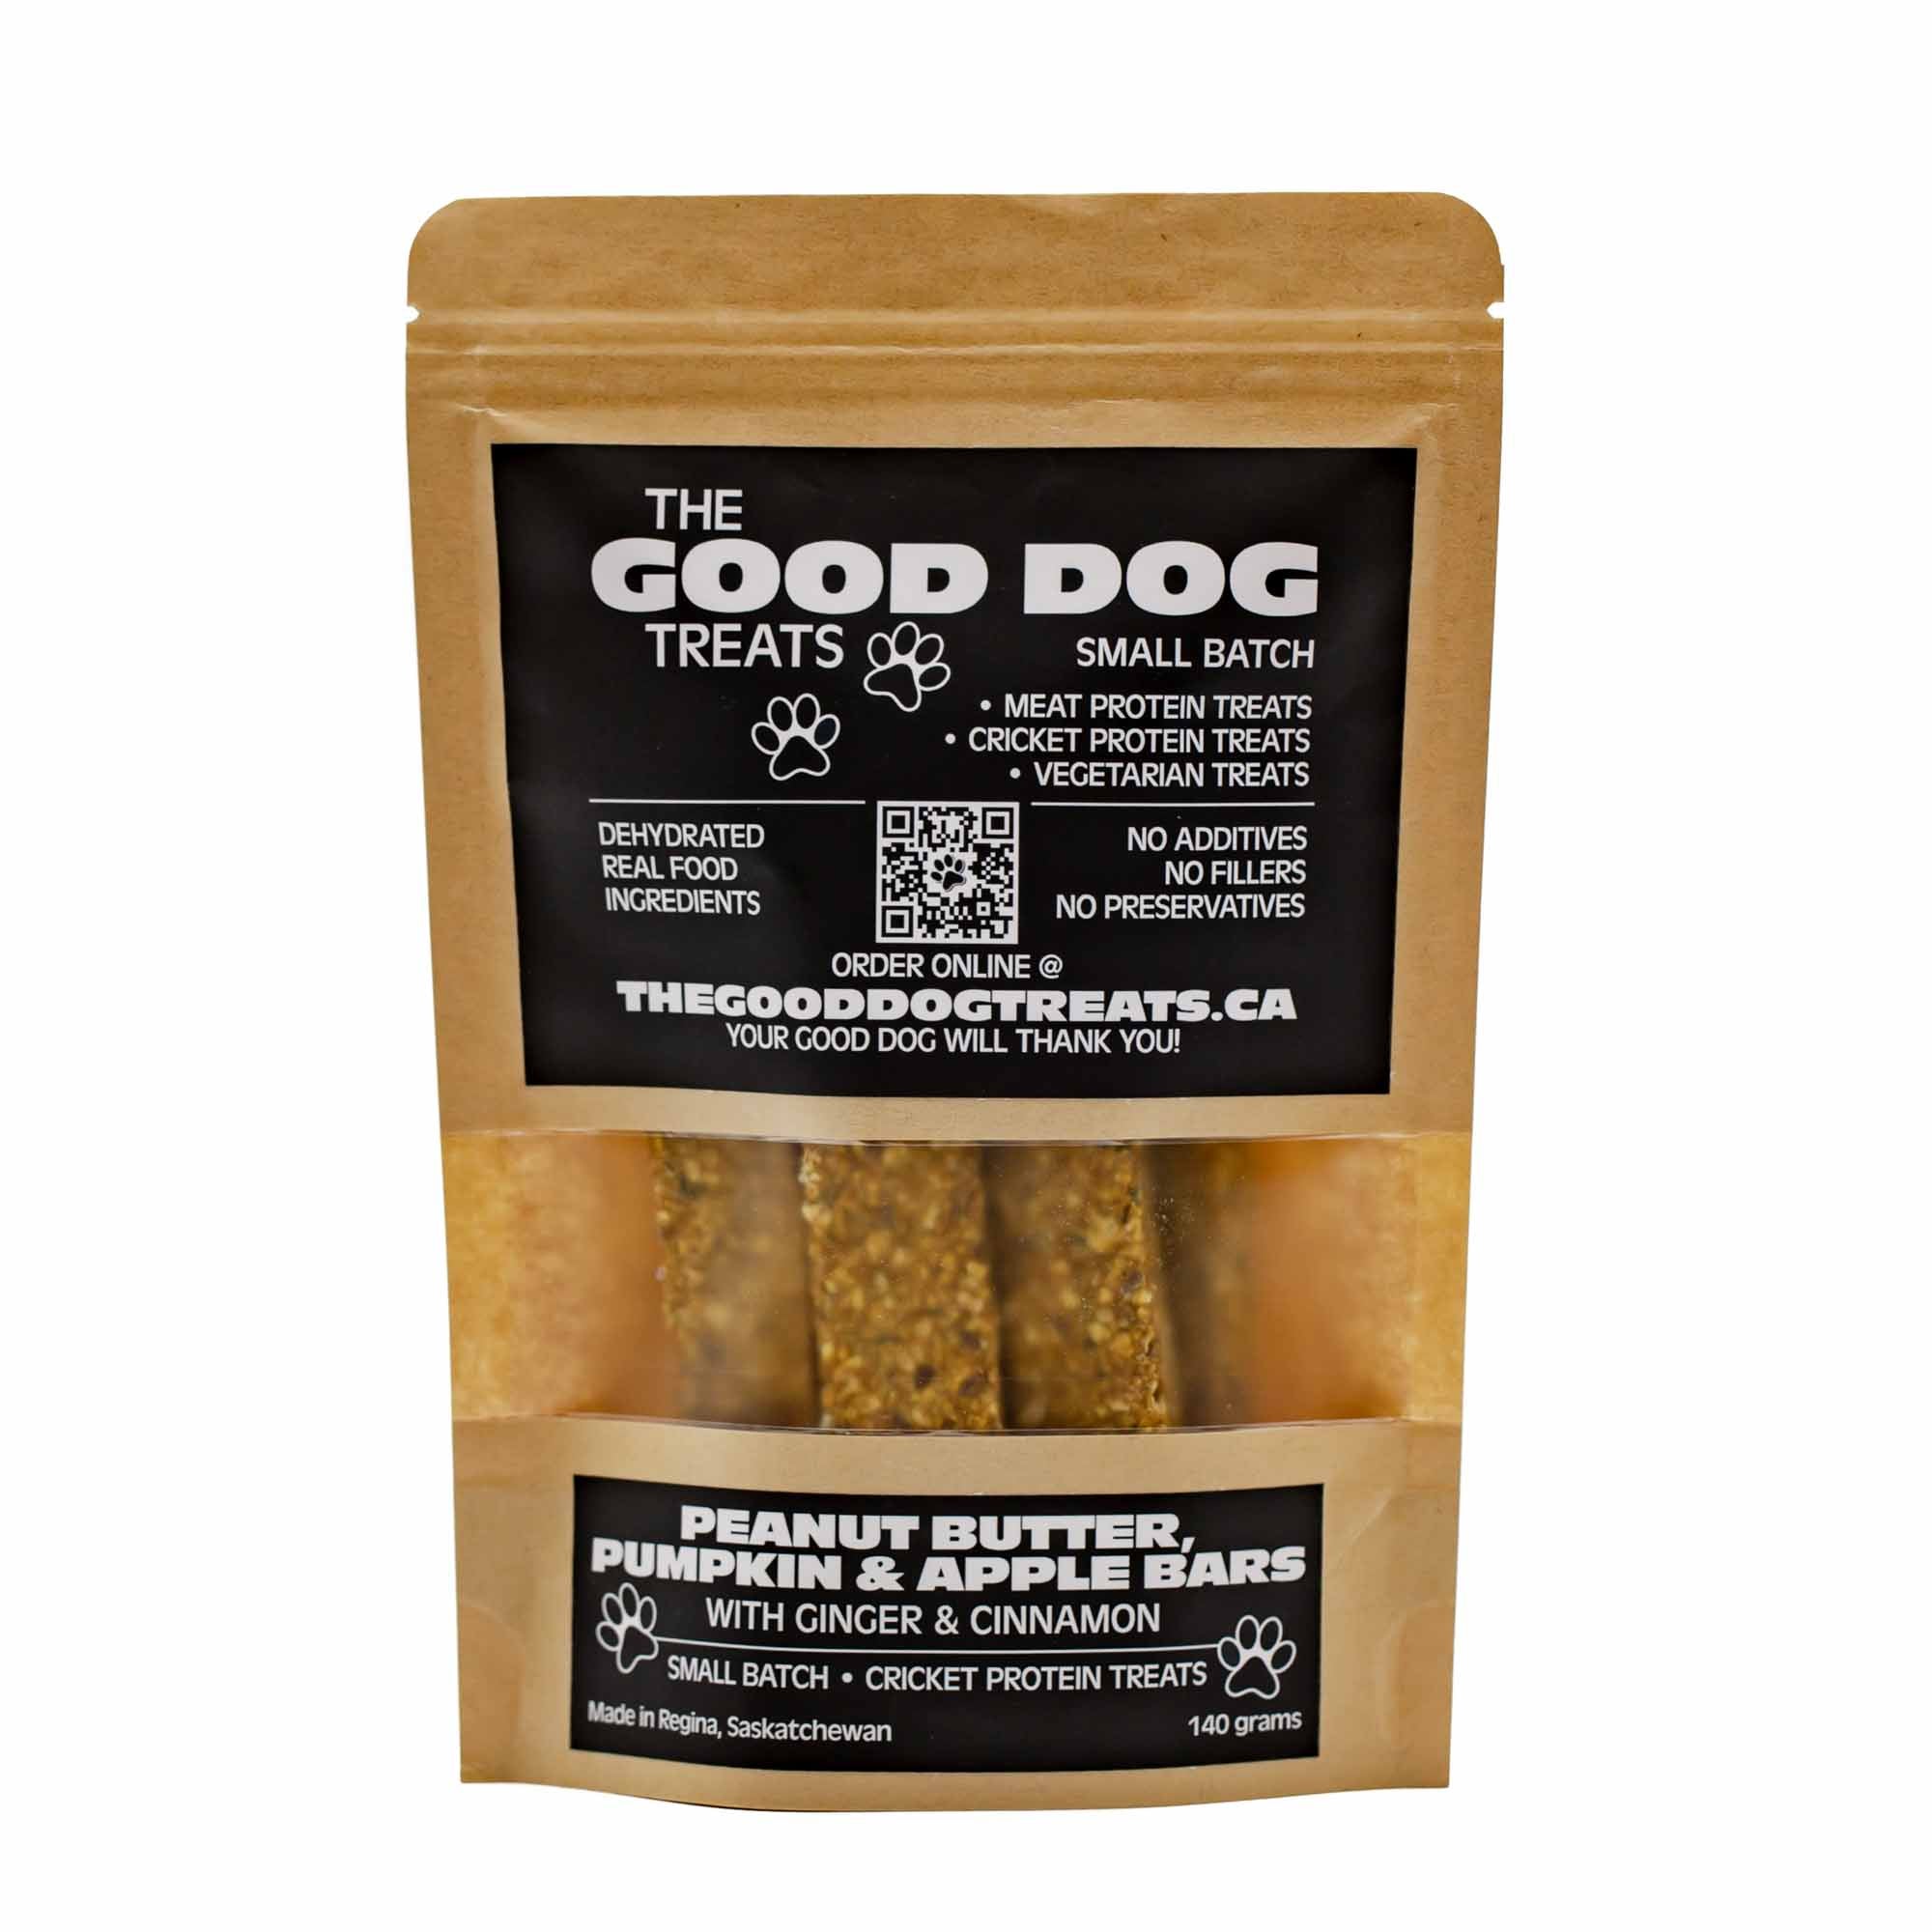 The Good Dog Treats - Peanut Butter, Pumpkin & Apple Bars with Ginger & Cinnamon - Mortise And Tenon